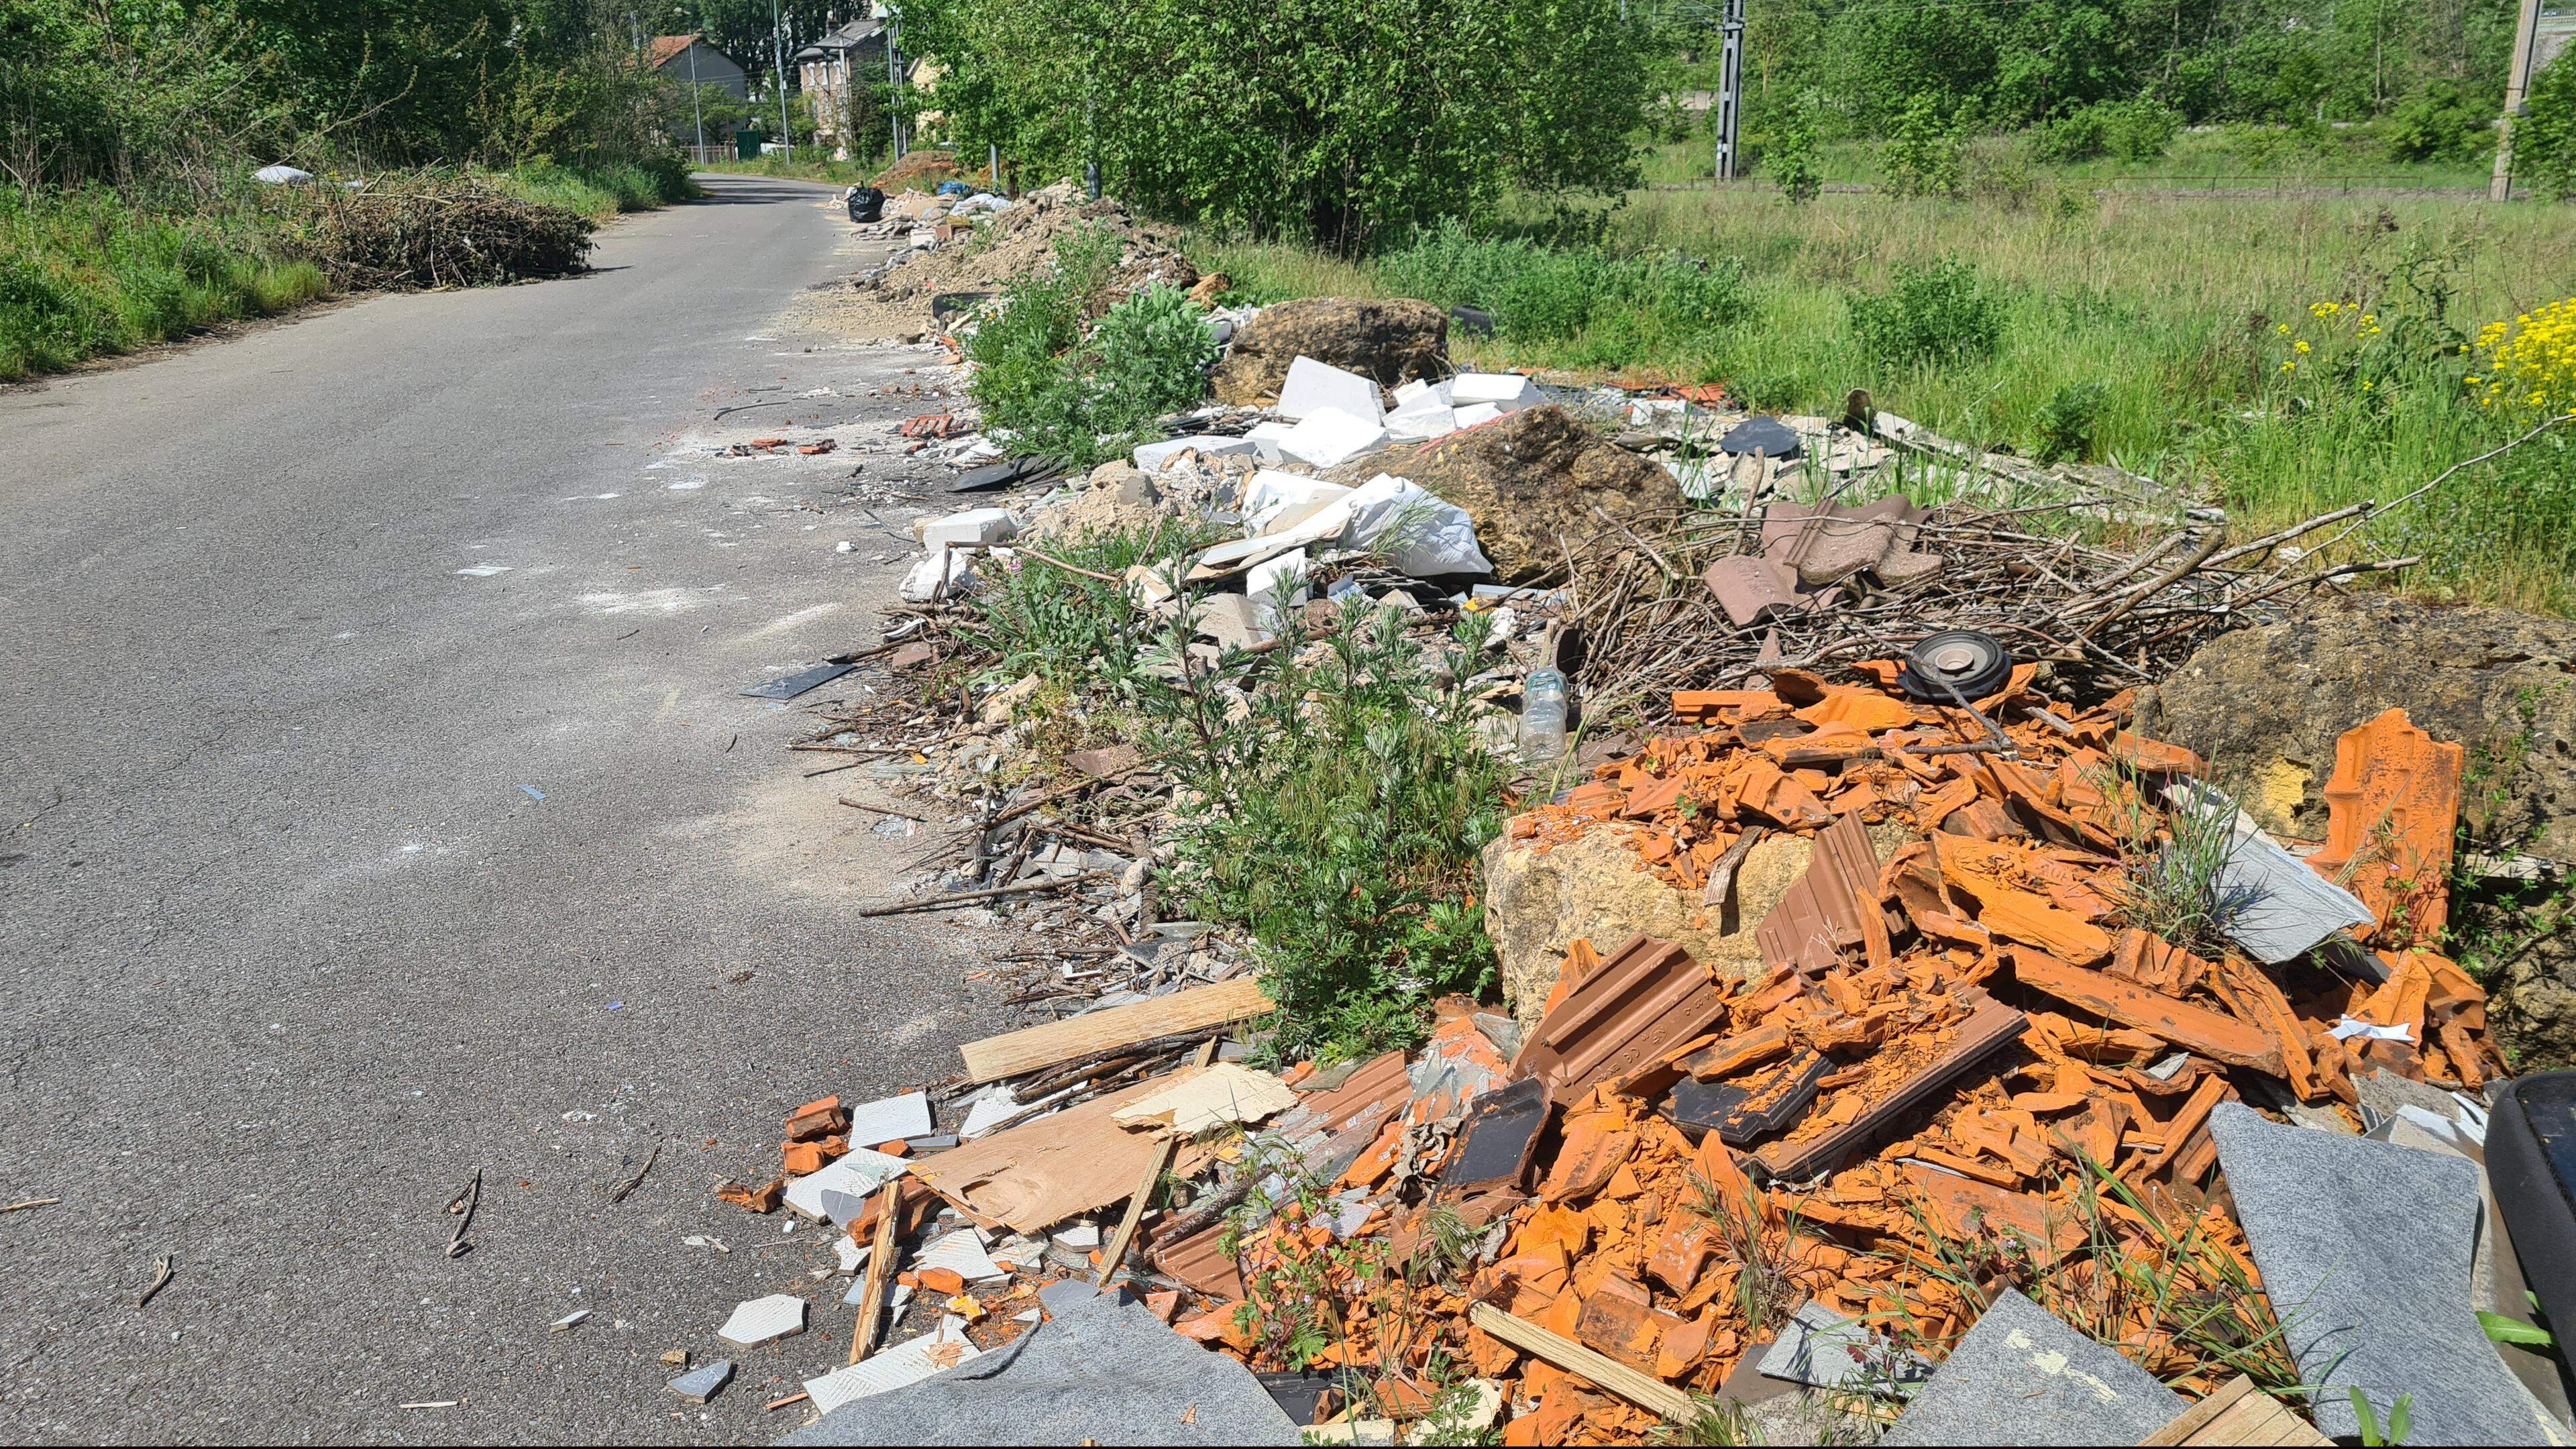 For several years now, the Longwy conurbation has had to contend with the scourge of illegal waste dumping, particularly from Luxembourg